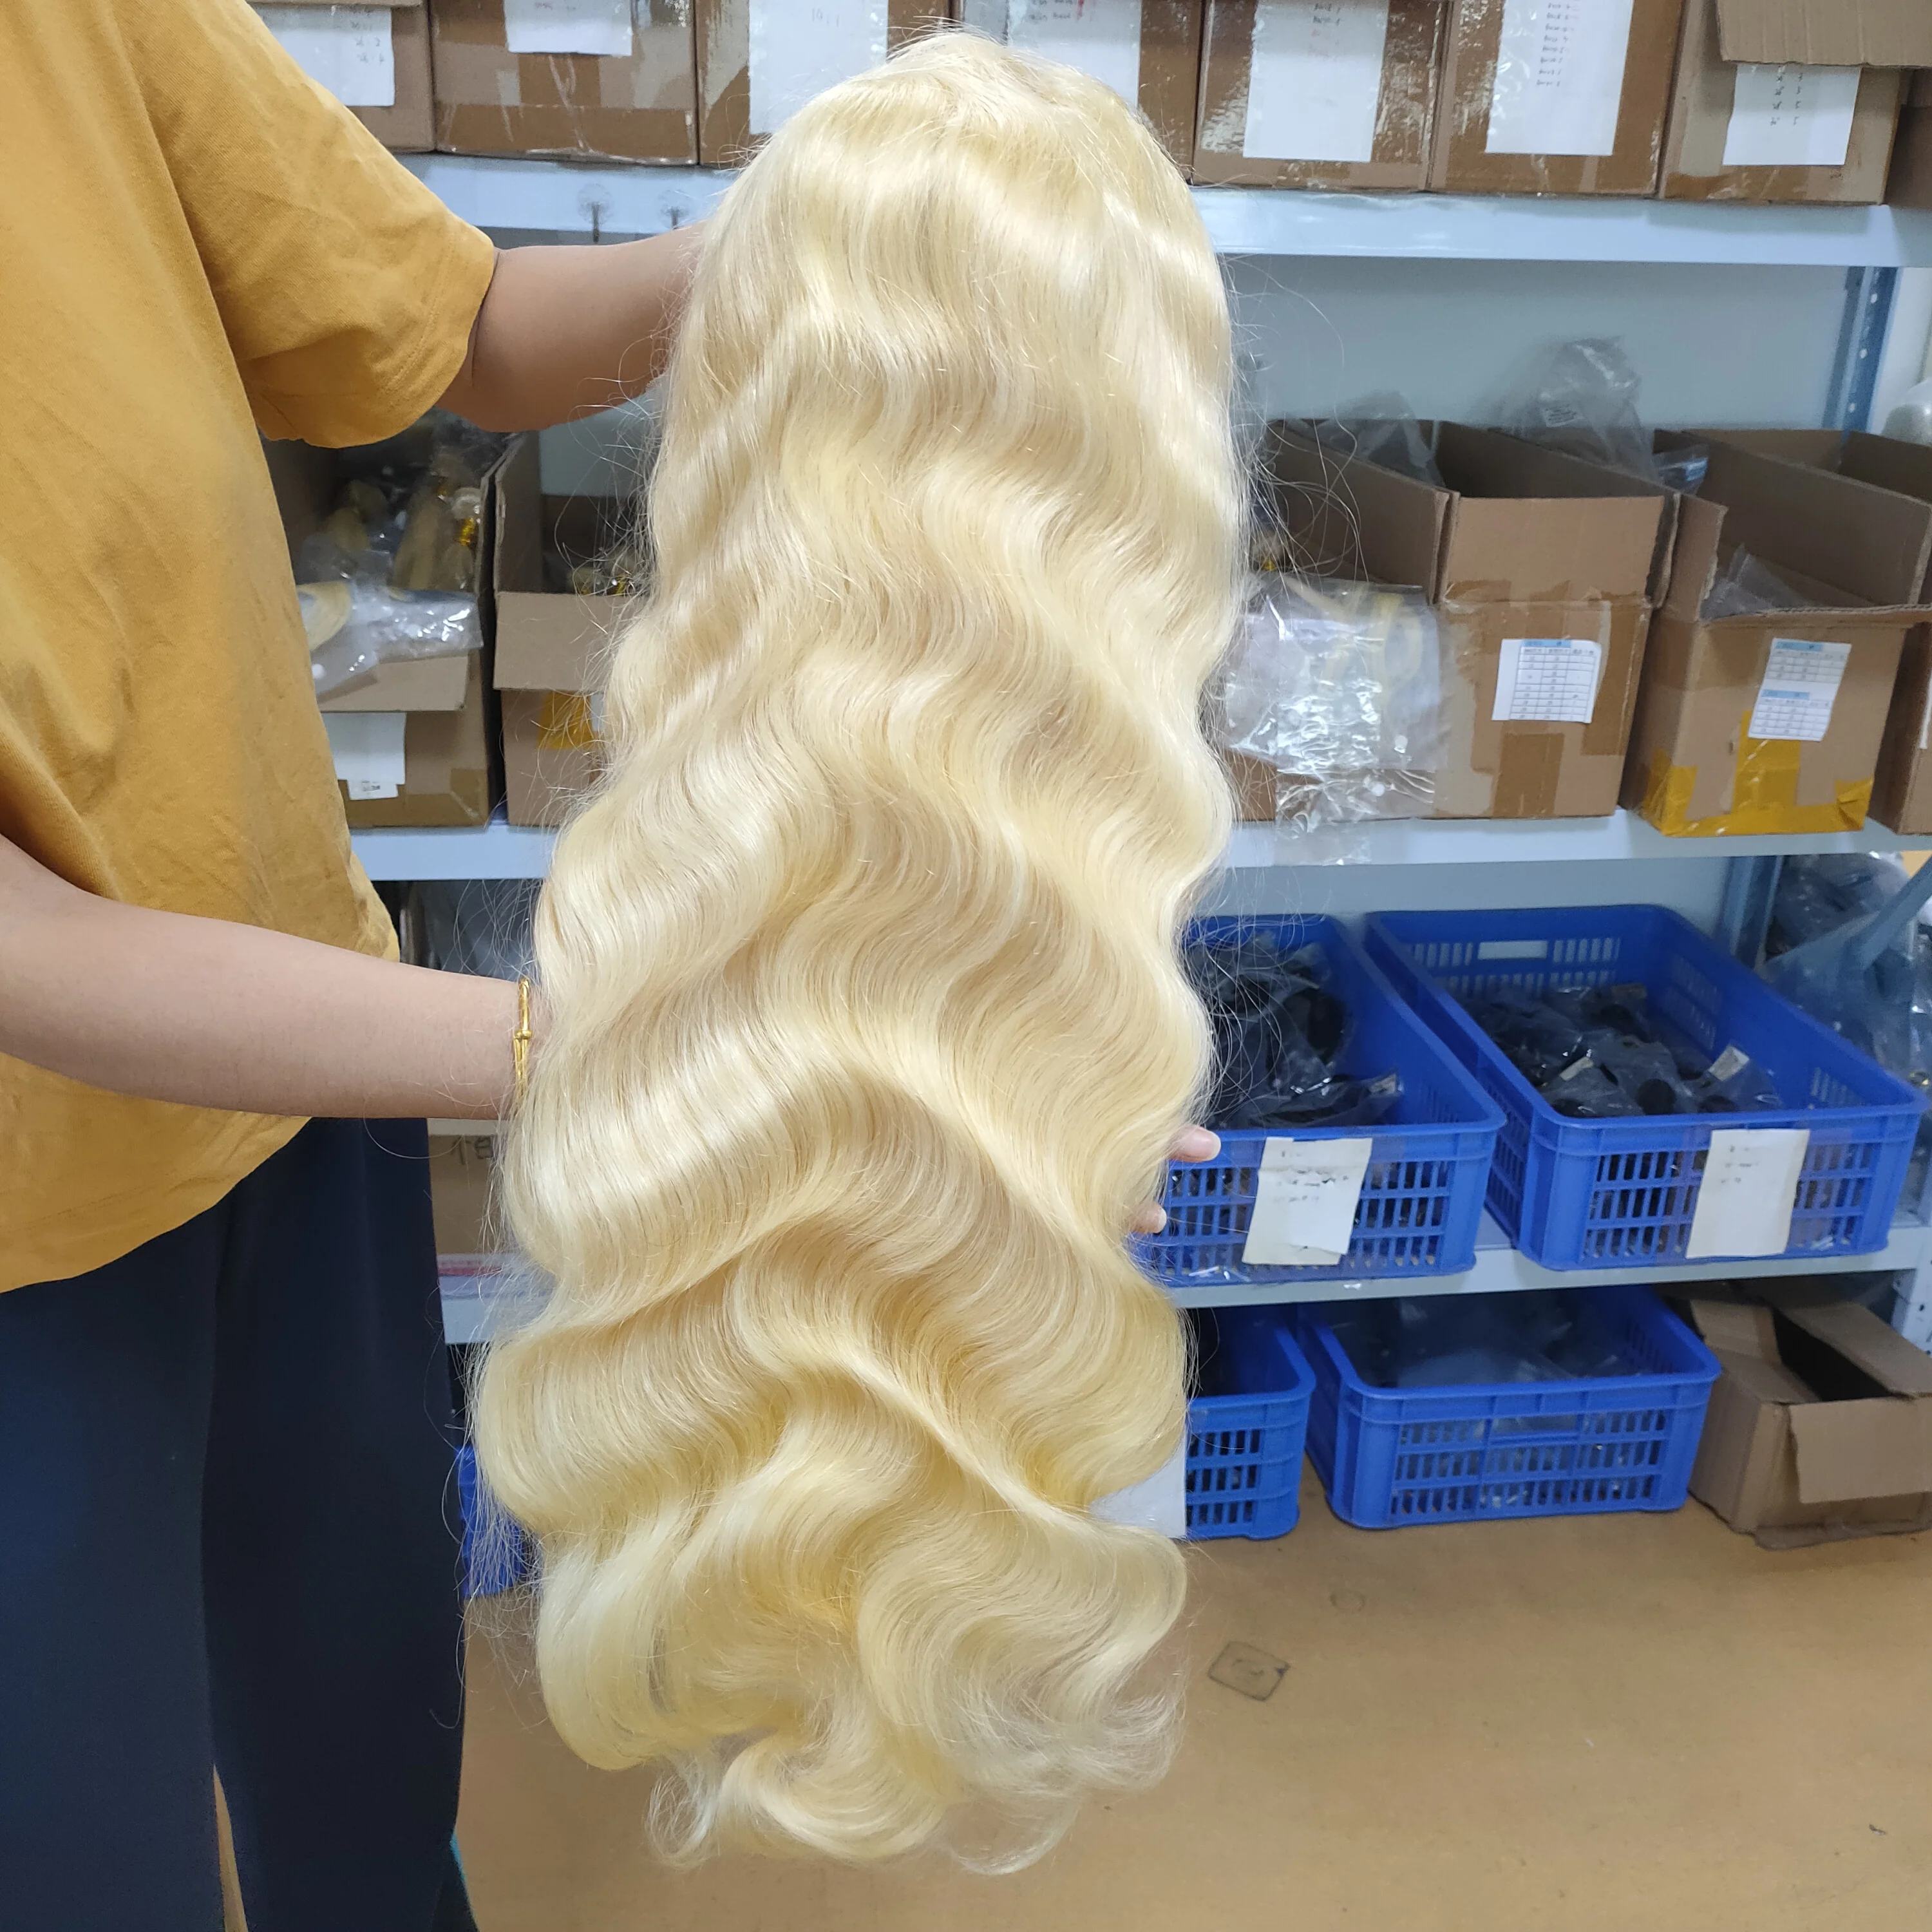 

30 Inch Raw Virgin Deep Wave 613 Blonde Hd Lace Front Wig 13x4 Curly Transparent Lace Frontal Human Hair Wig 613 Full Lace Wig